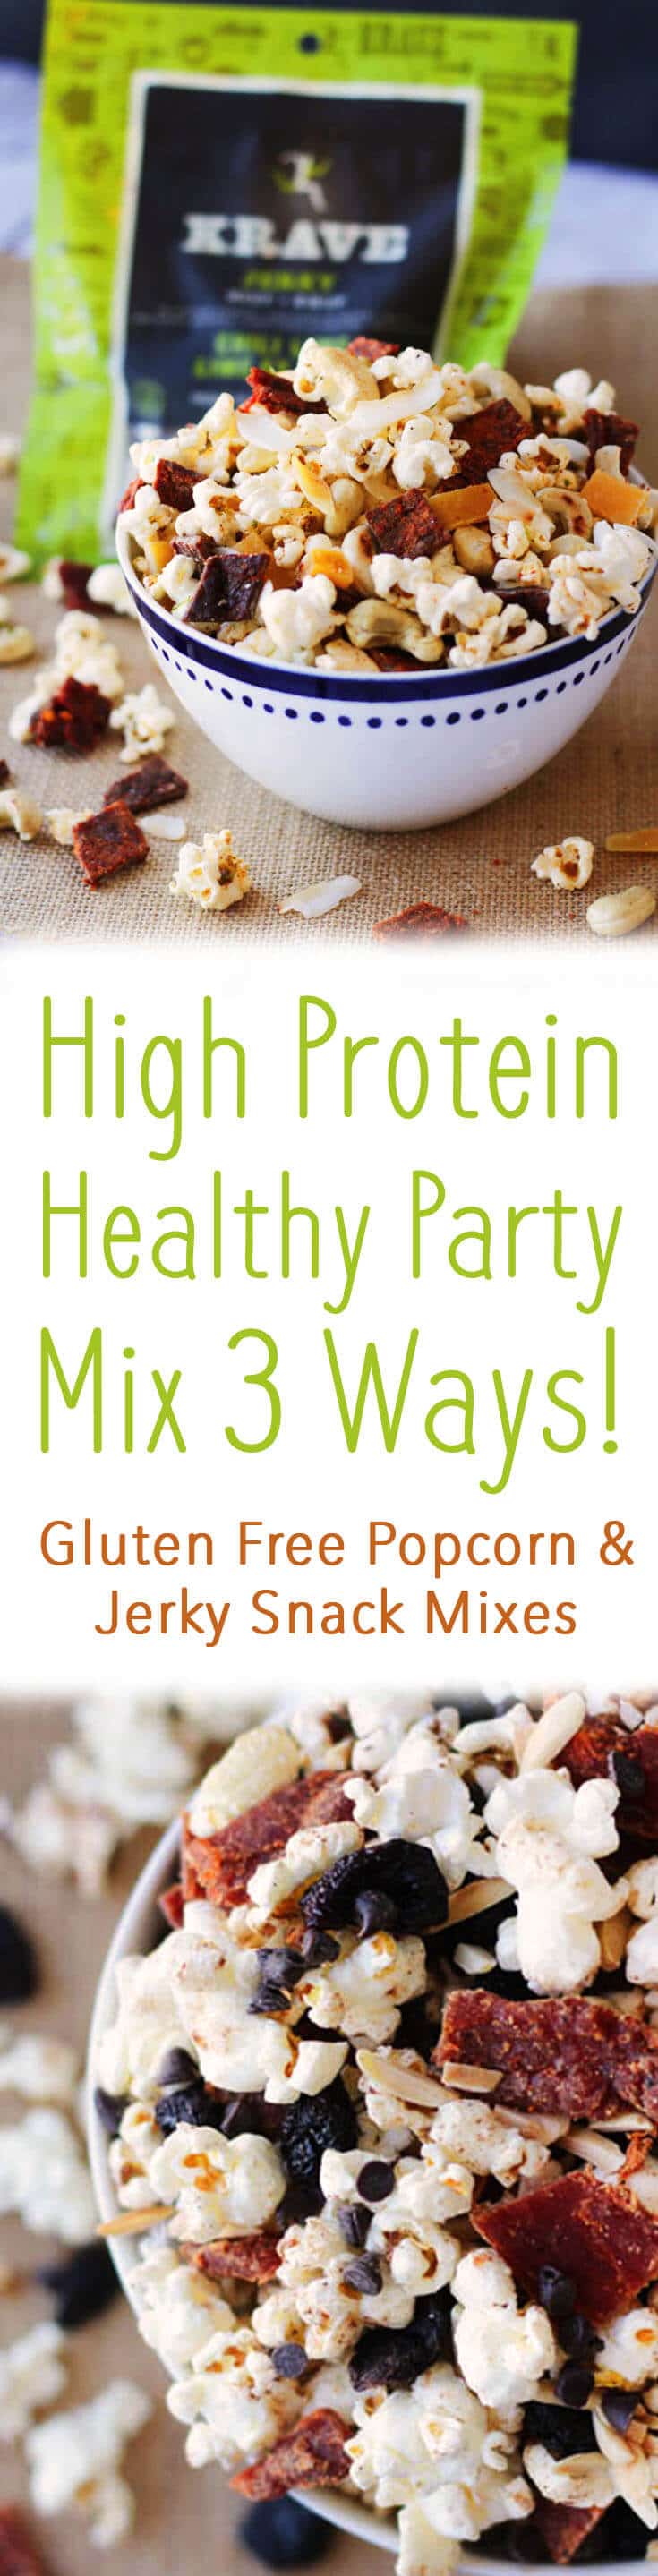 A pinterest image of popcorn with the text overlay \"High Protein Healthy Party Mix 3 Ways! Gluten Free Popcorn & Jerky Snack Mixes.\"